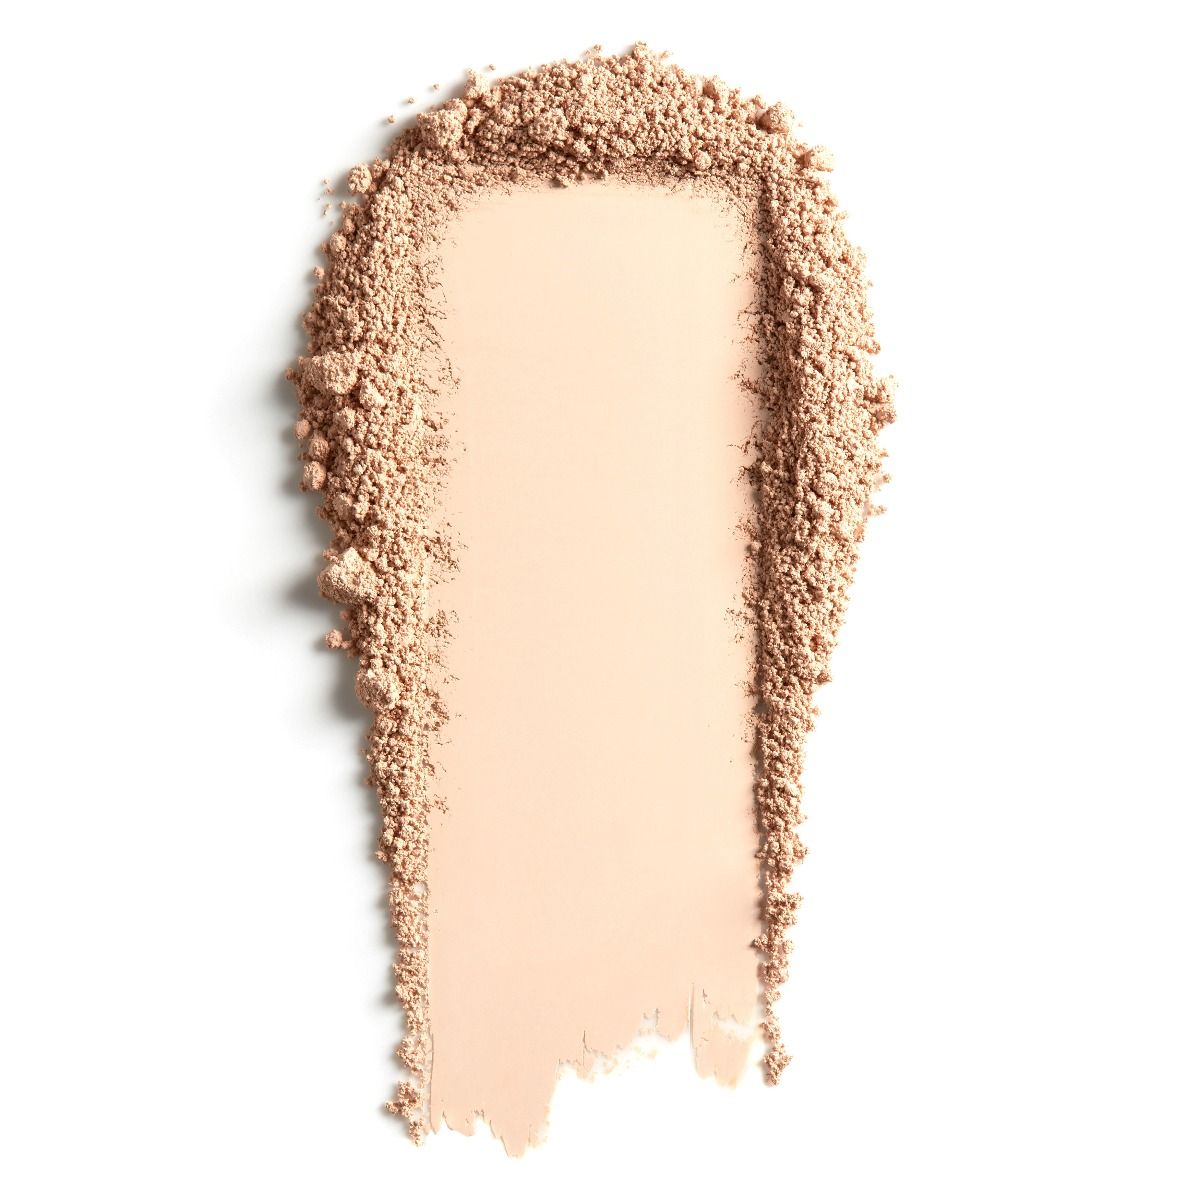 Lily Lolo Caramel Cover Up: Vegan. Gluten Free. GMO Free. Cruelty Free. A medium concealer suitable for all undertones